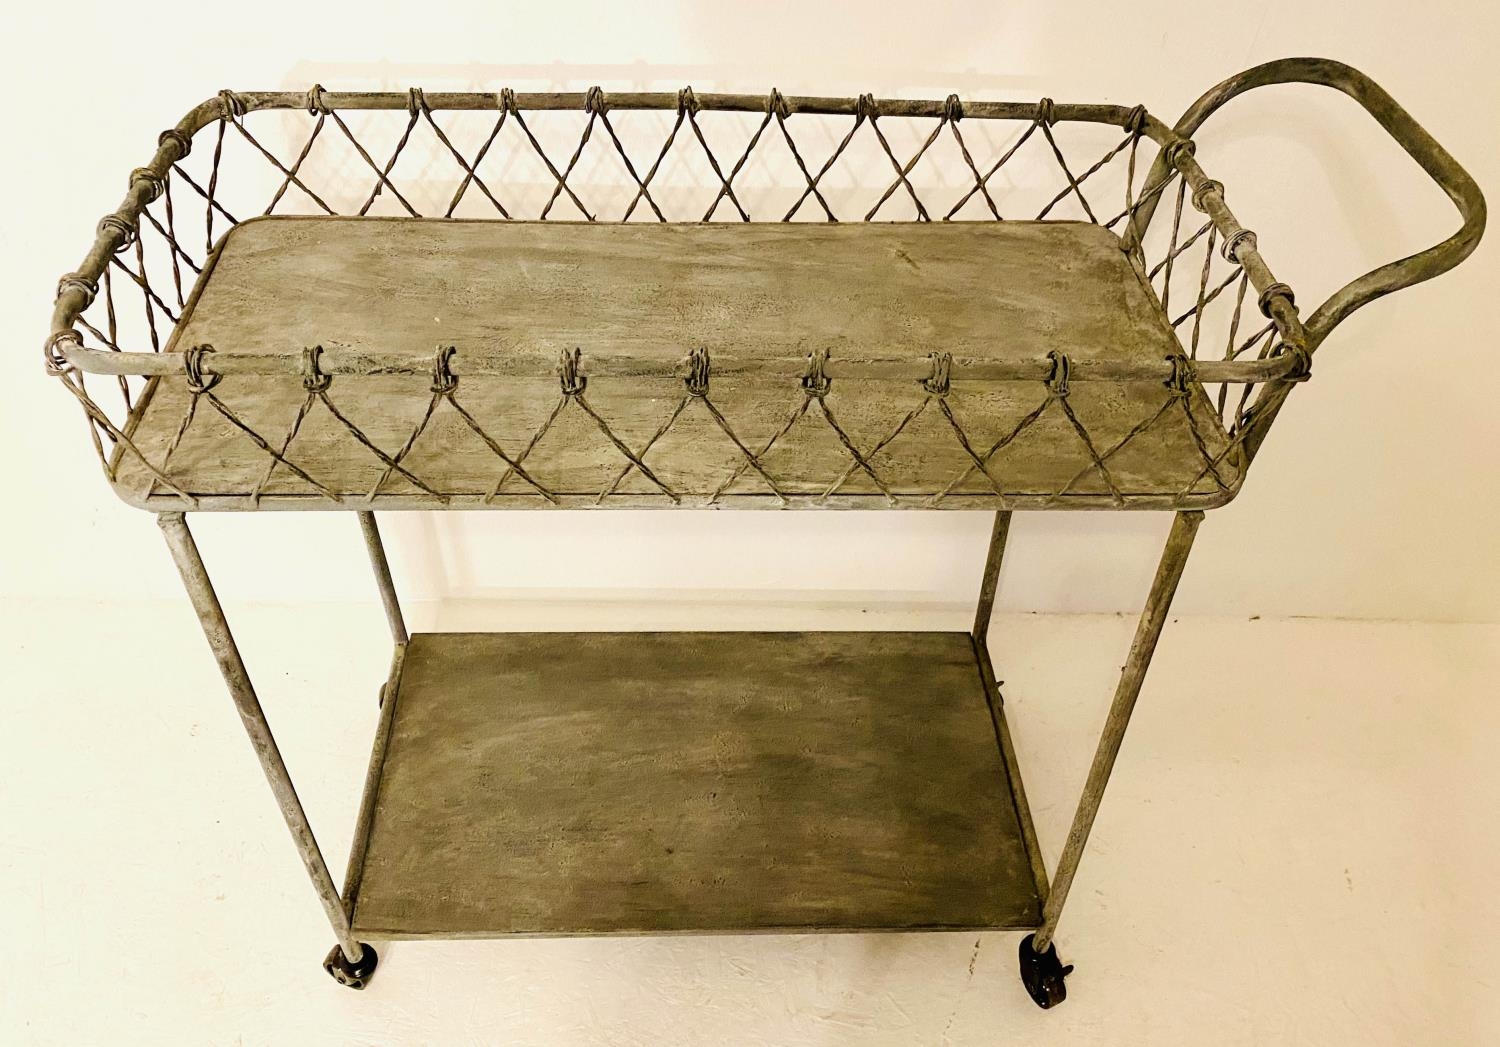 DRINKS TROLLEY, 1950s French style, aged painted finish, 85cm x 90cm x 38cm.